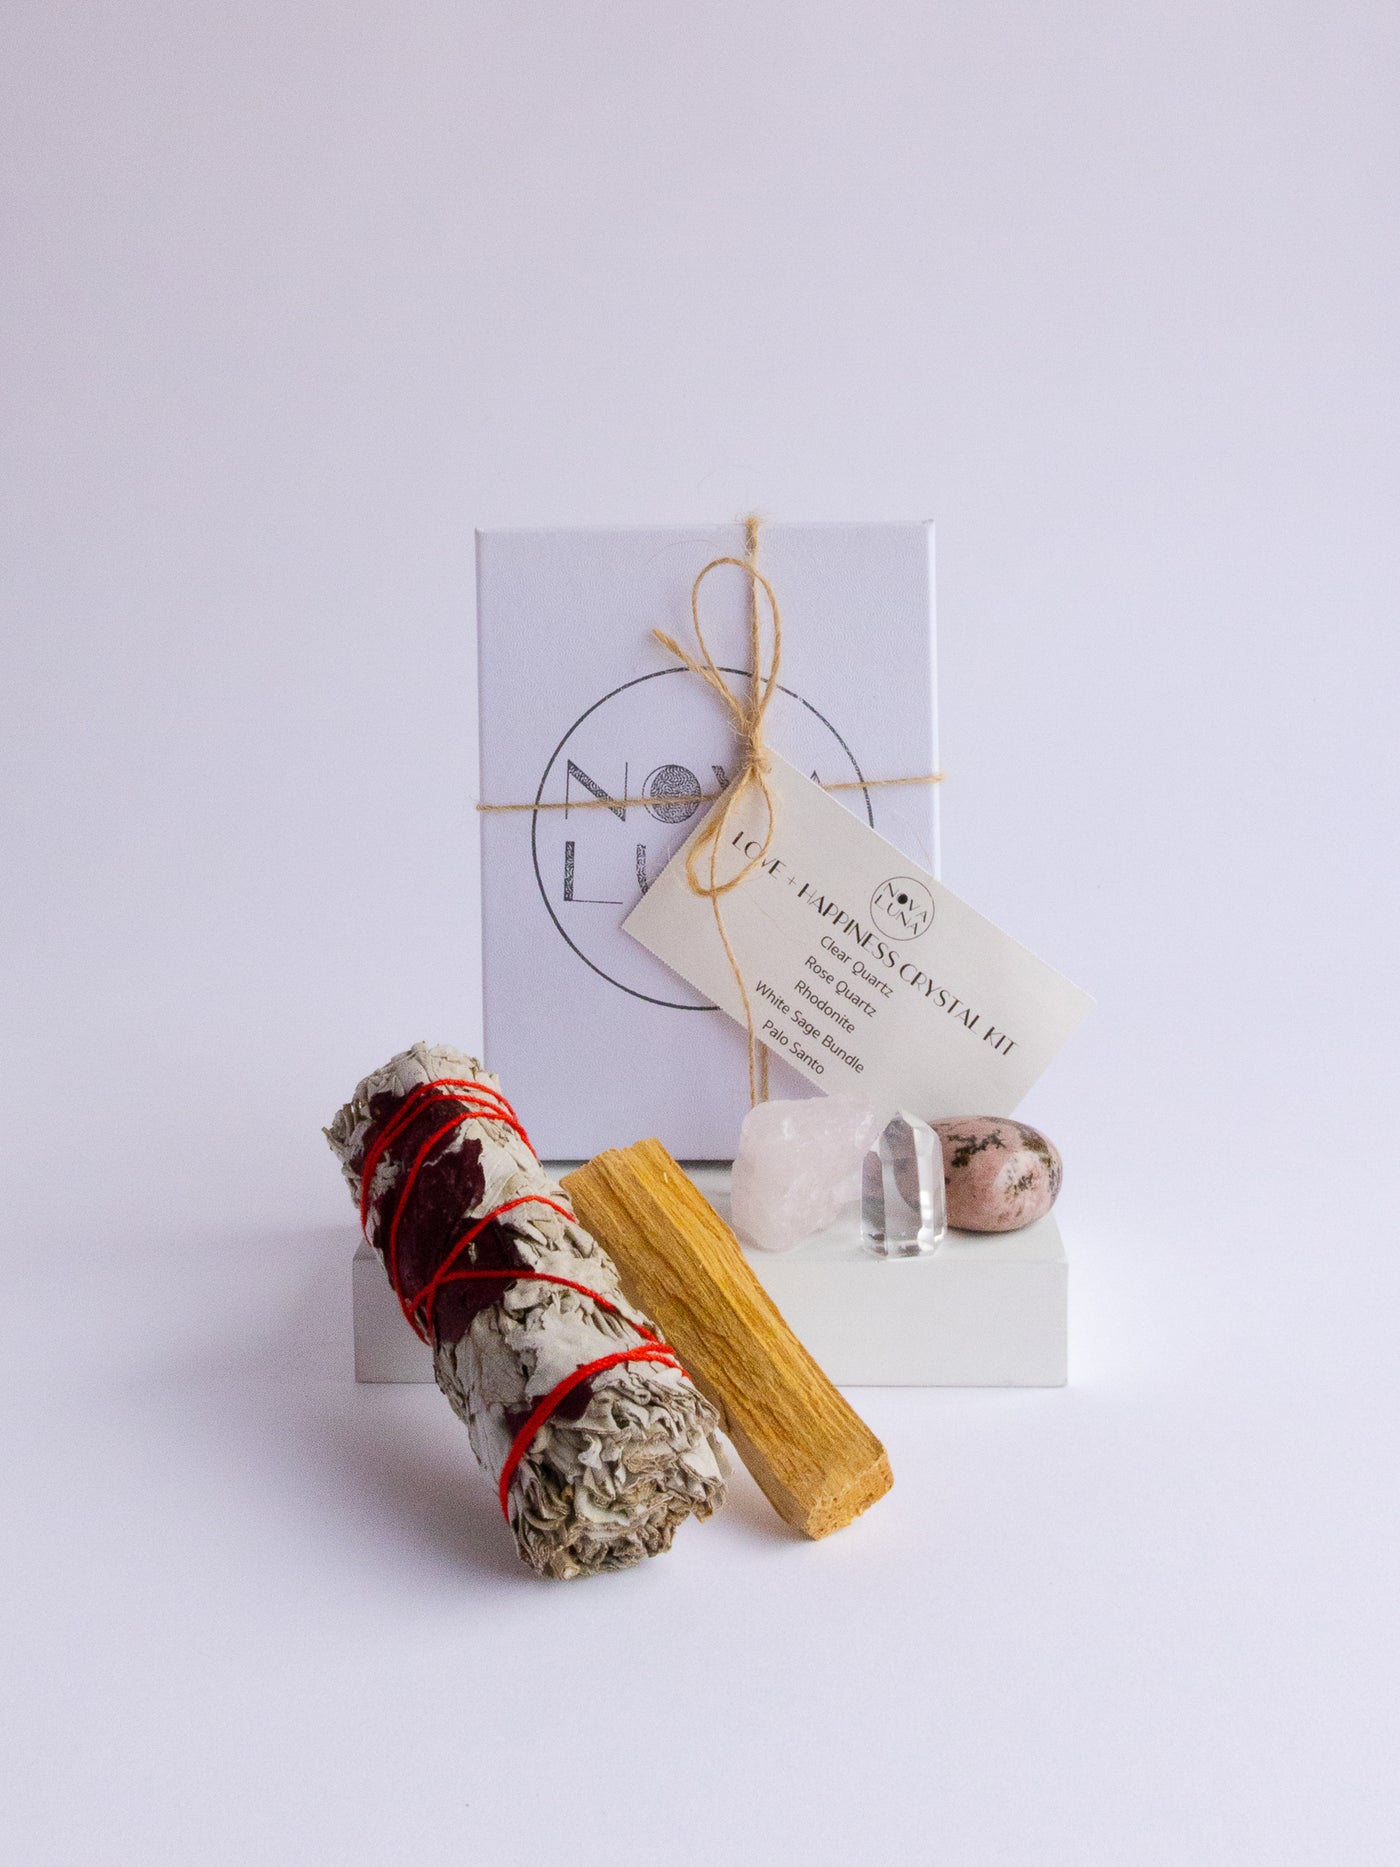 Love + Happiness Crystal Kit with Clear Quartz, Rose Quartz, Rhodonite, White Sage, and Palo Santo.